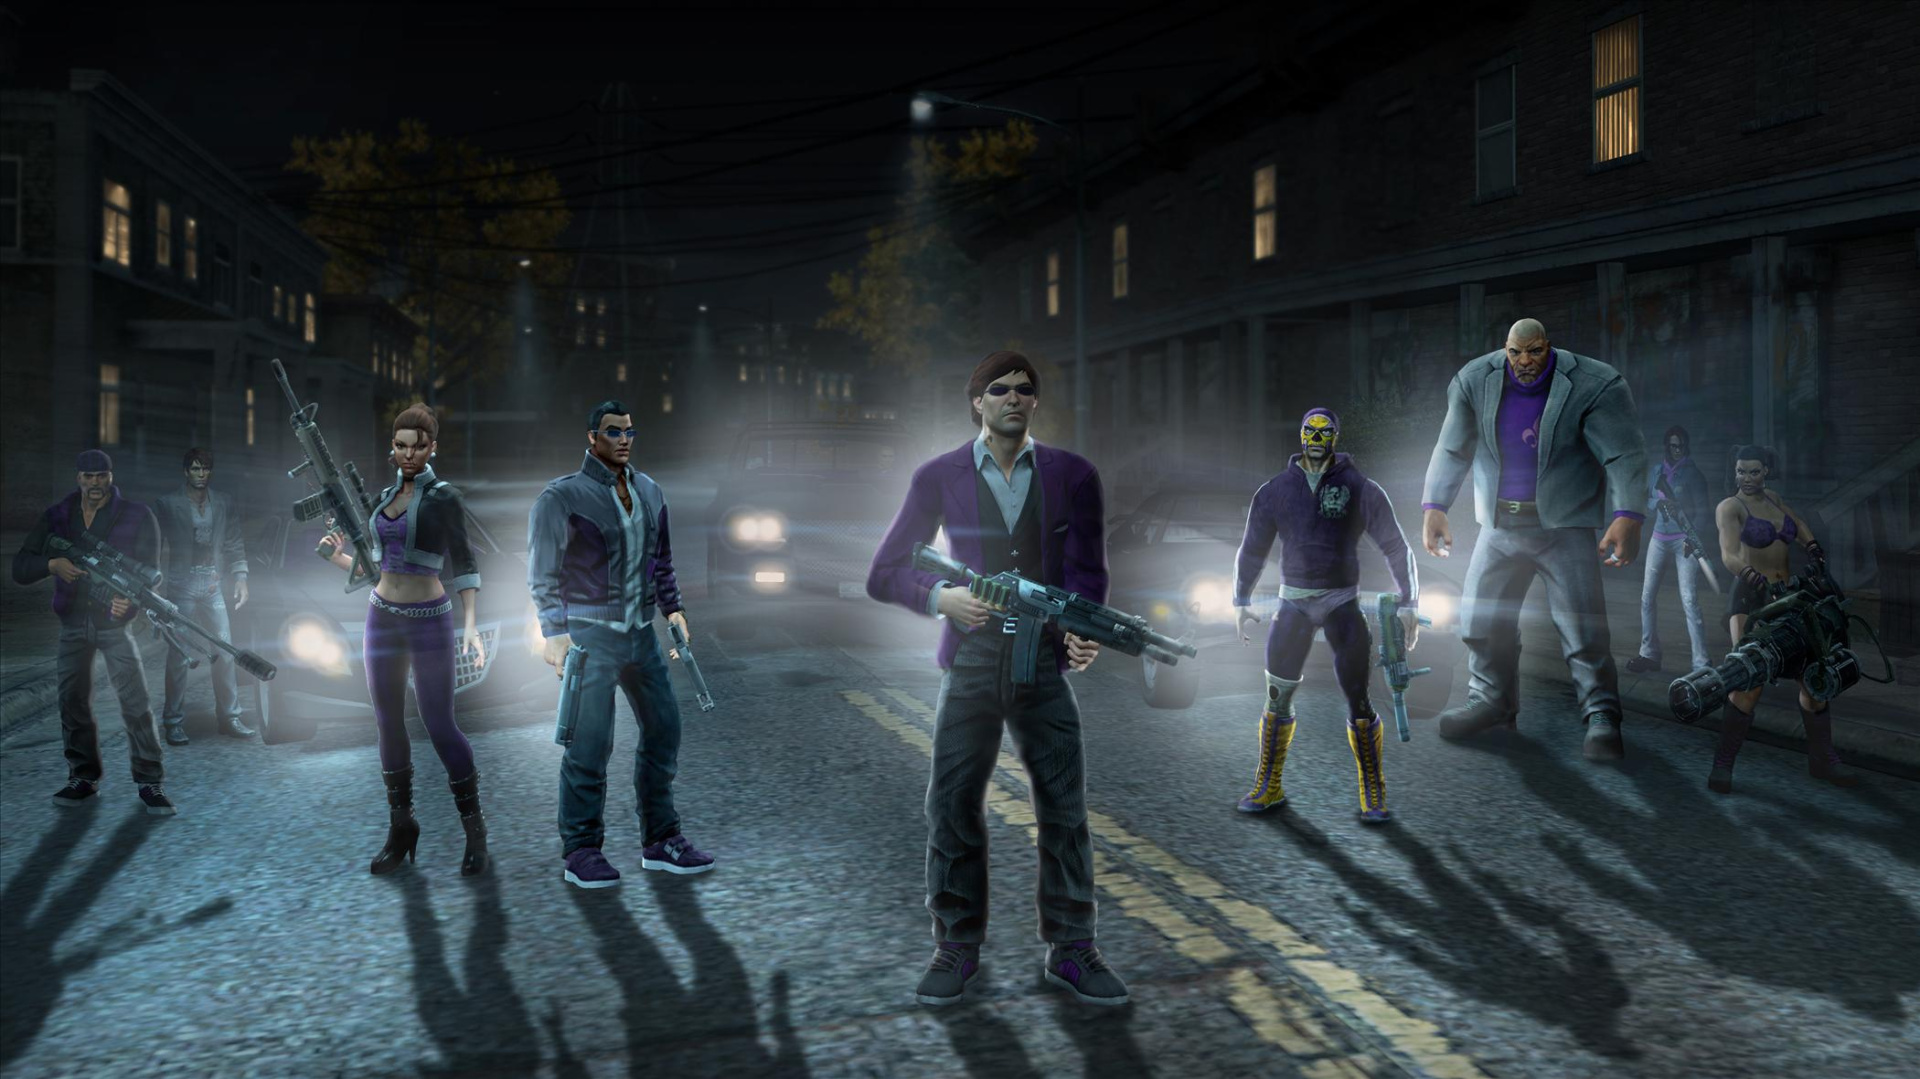 free download saints row 3 remastered